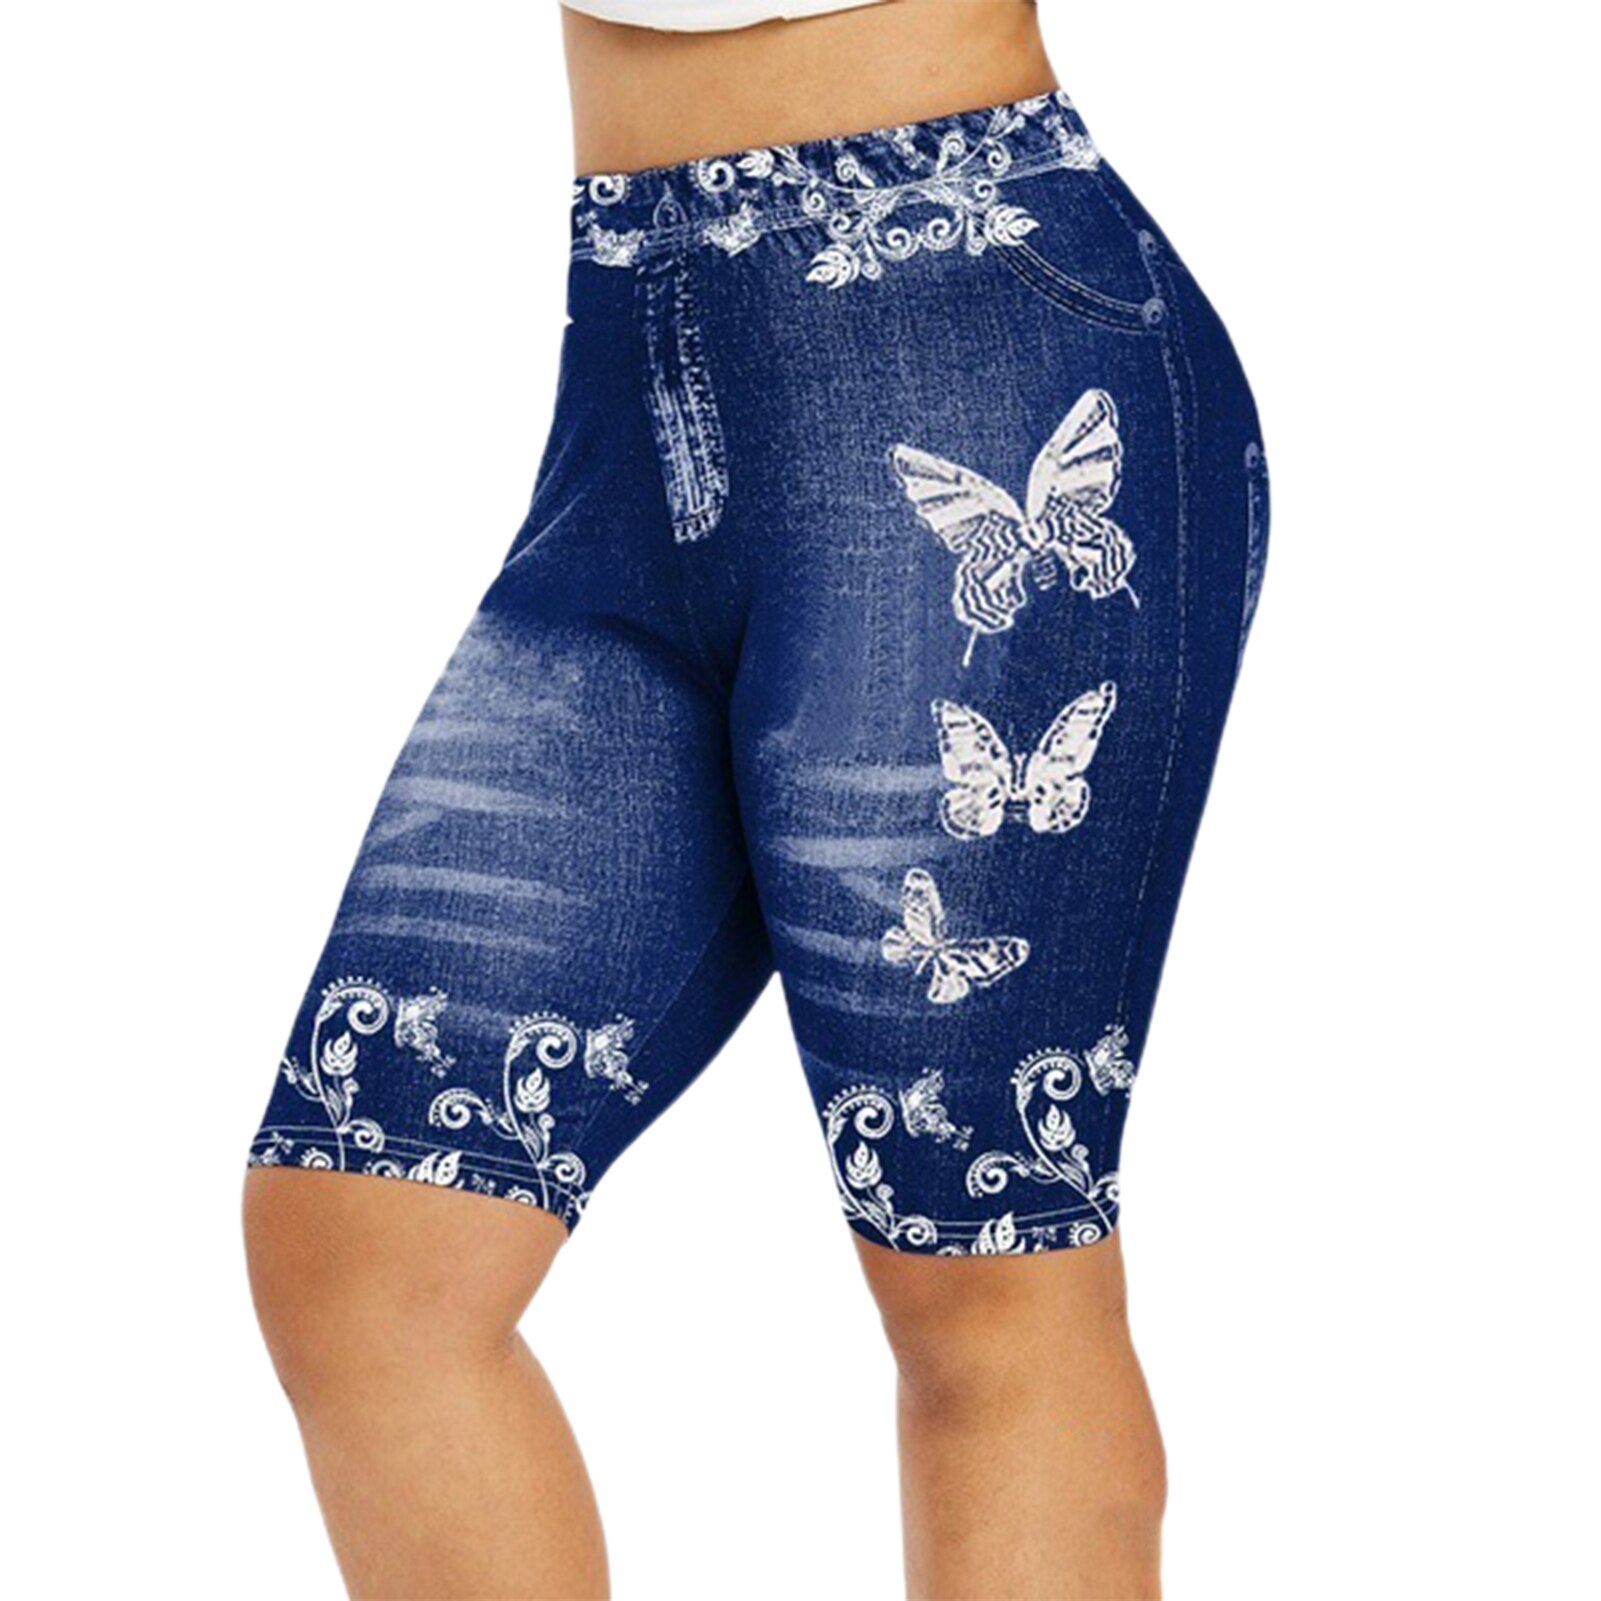 Shorts Women Lace Patchwork Butterfly Print Bodycon Shorts